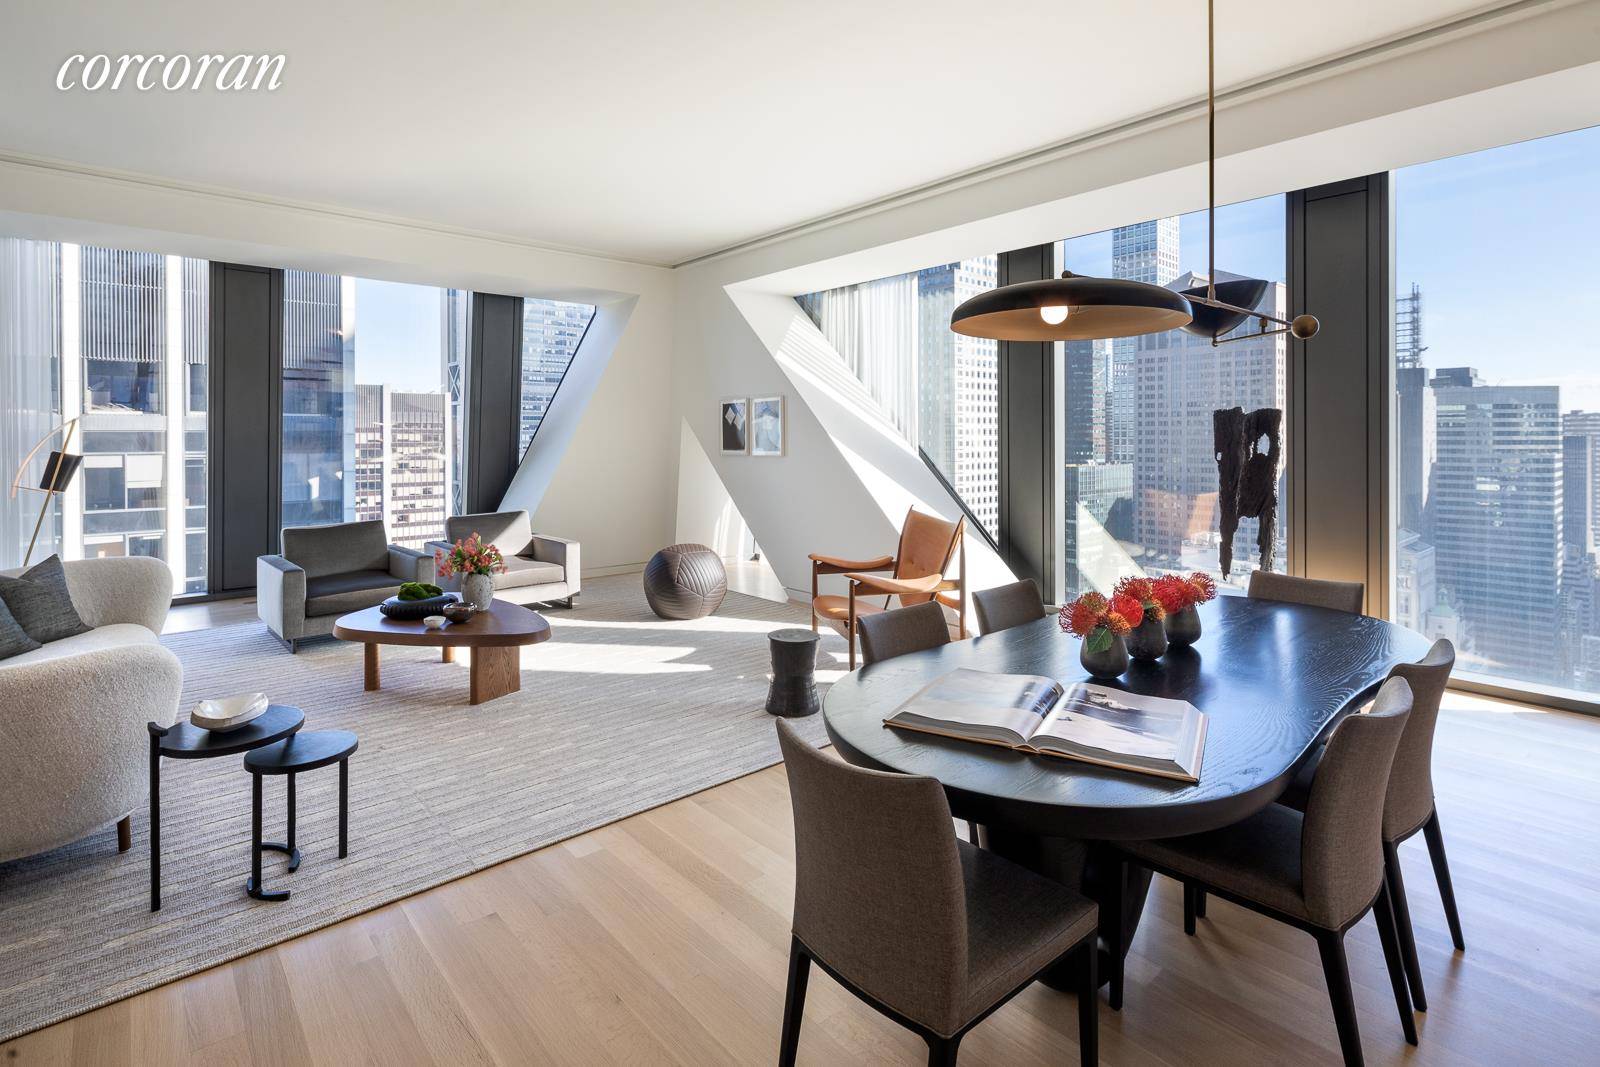 With interior design by New York based architect, designer and artist Thierry Despont, Residence 34A is a 3, 112 SF 289.